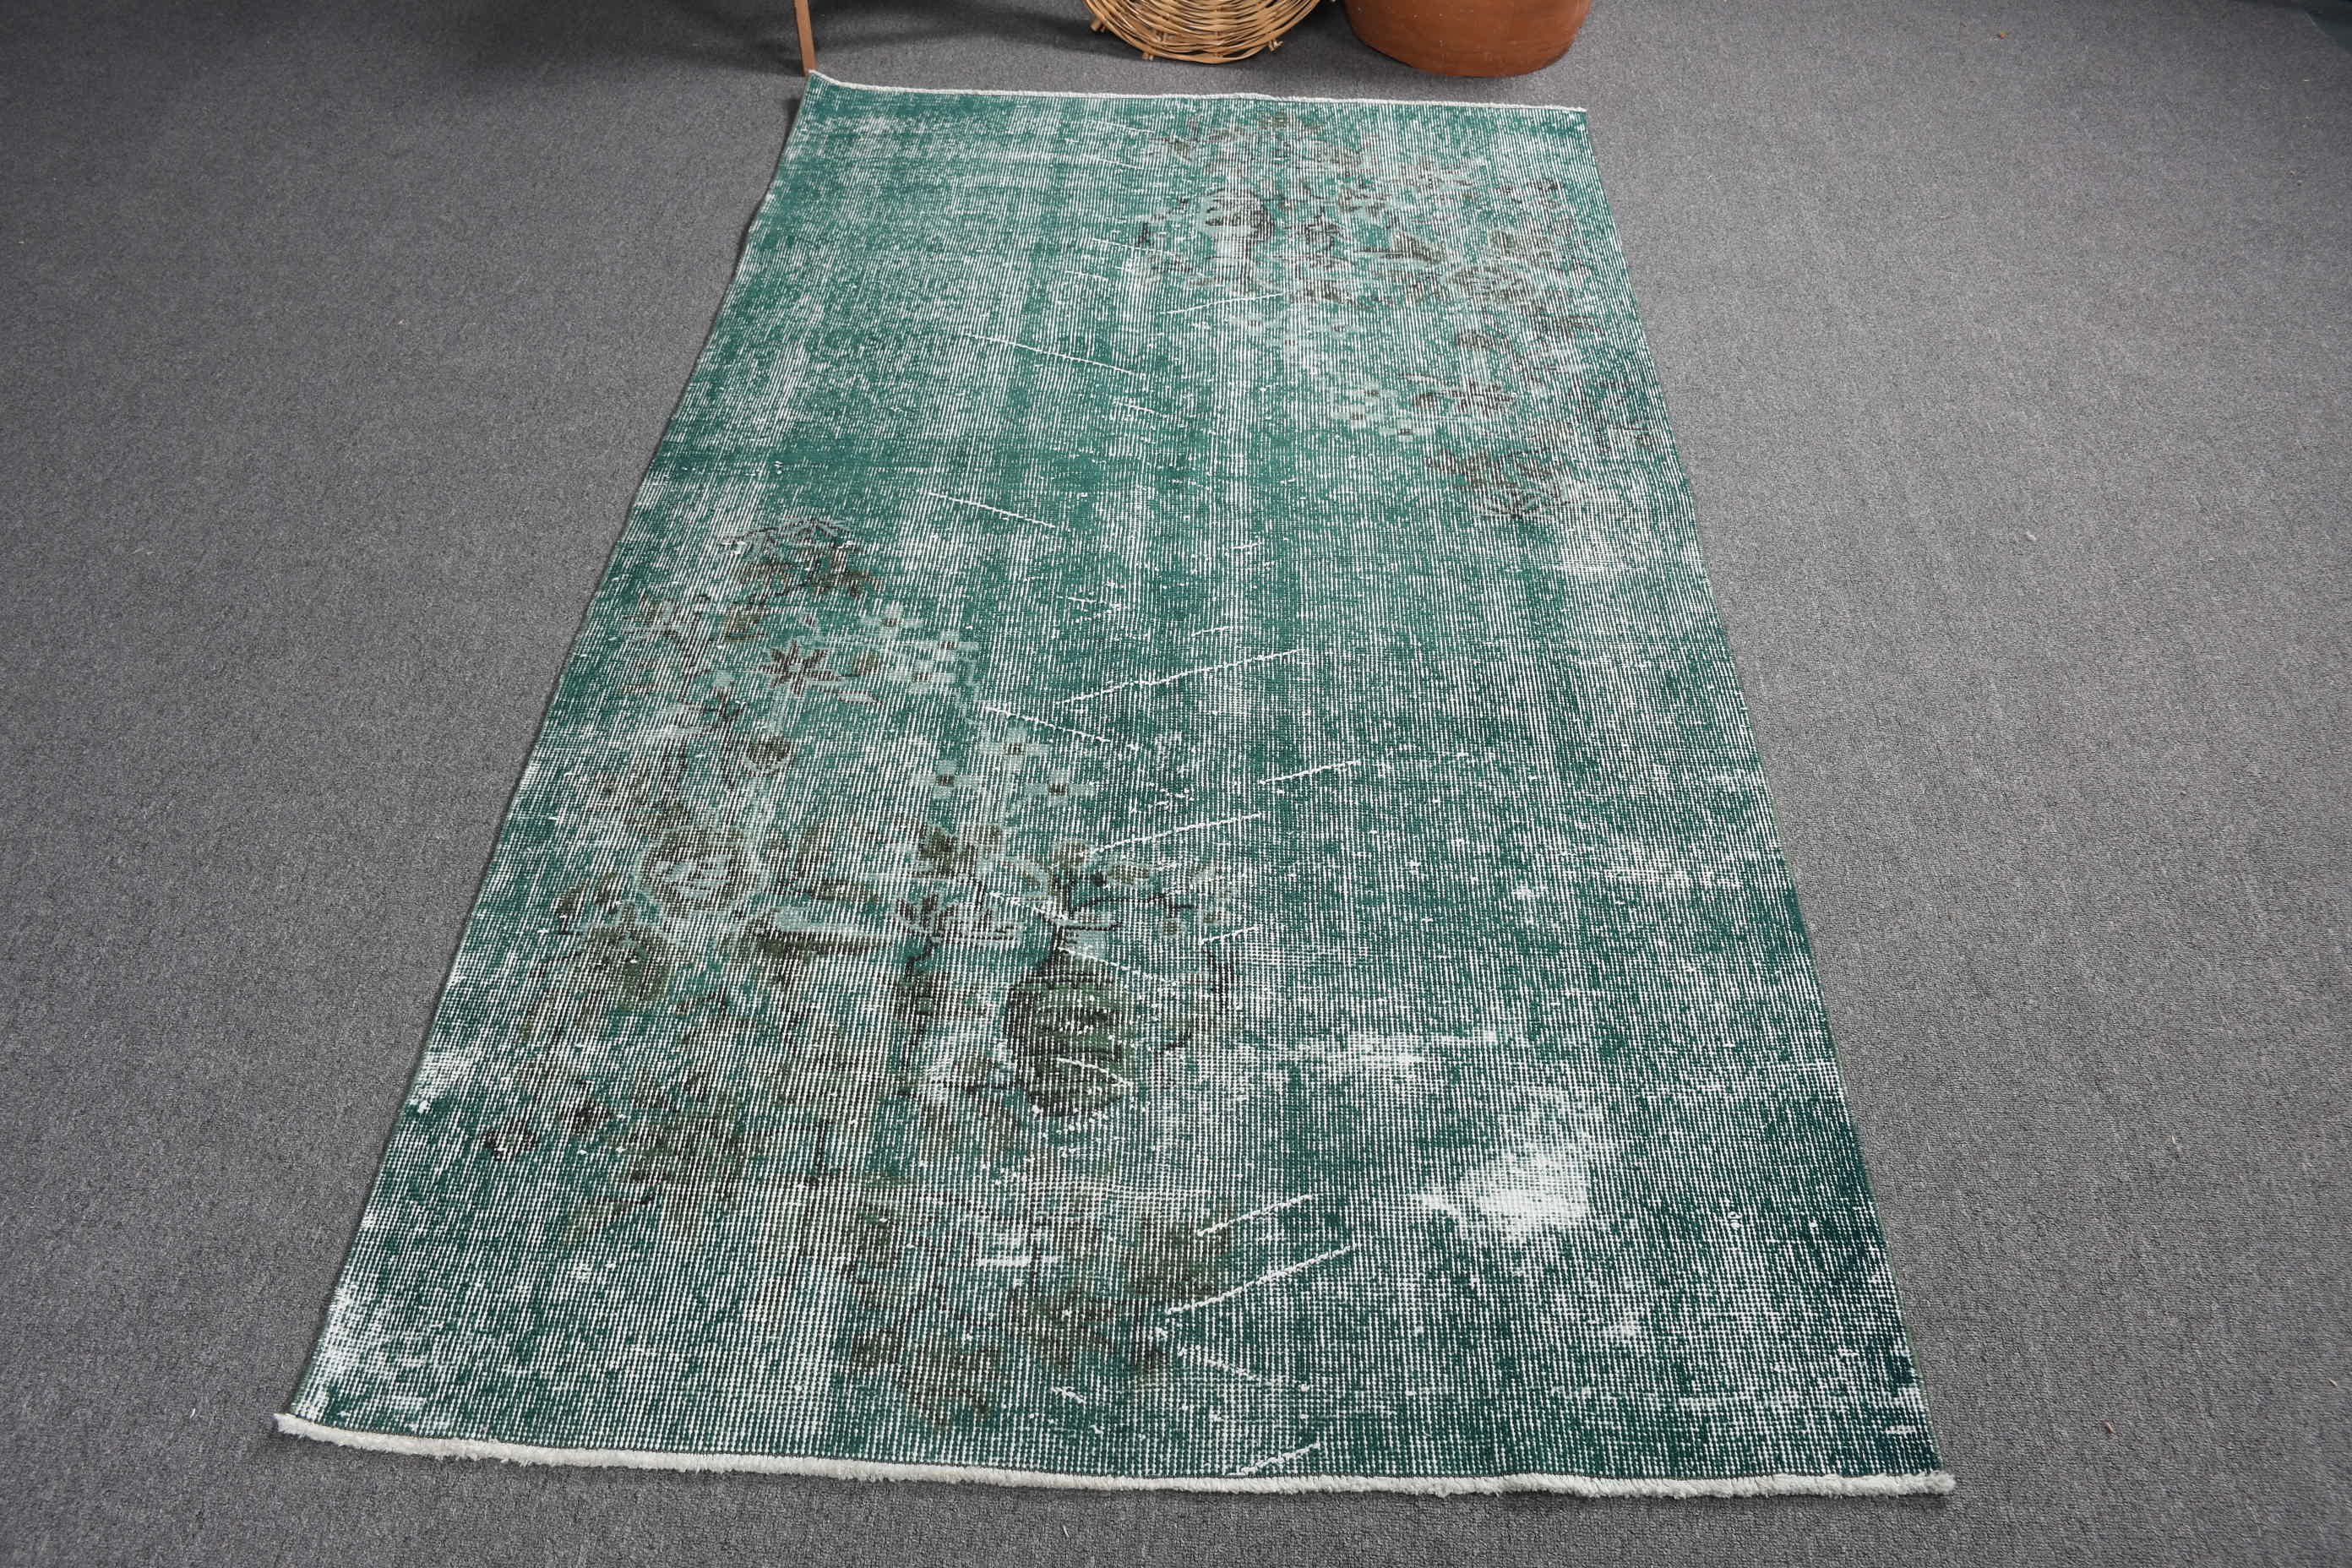 Vintage Rugs, Green Home Decor Rugs, Wool Rug, Turkish Rug, 3.8x6.8 ft Area Rug, Eclectic Rug, Kitchen Rug, Dining Room Rugs, Rugs for Area